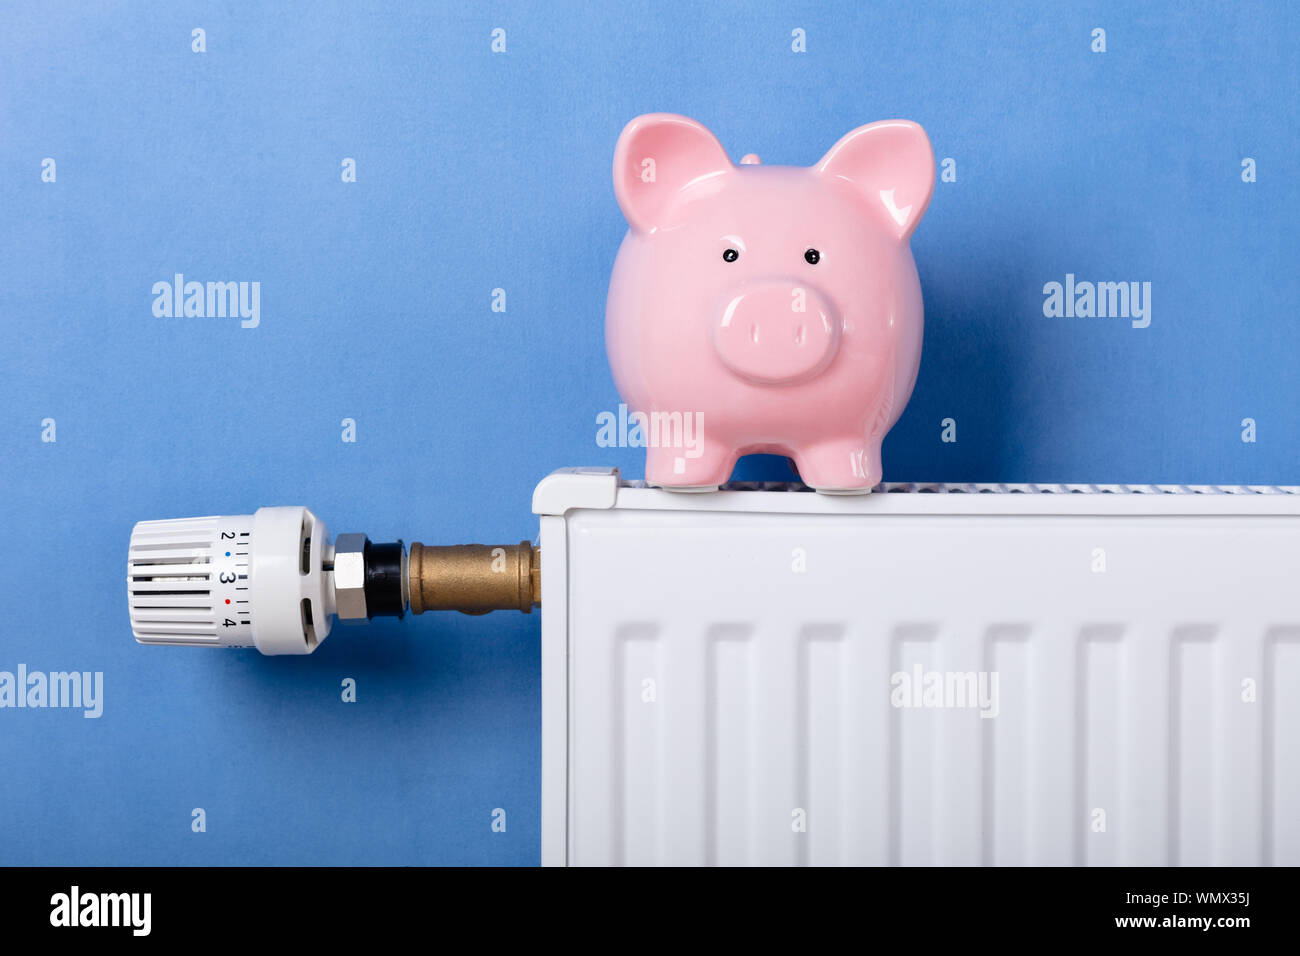 Piggy Bank On Heating Radiator With Temperature Regulator Against Blue Background Stock Photo